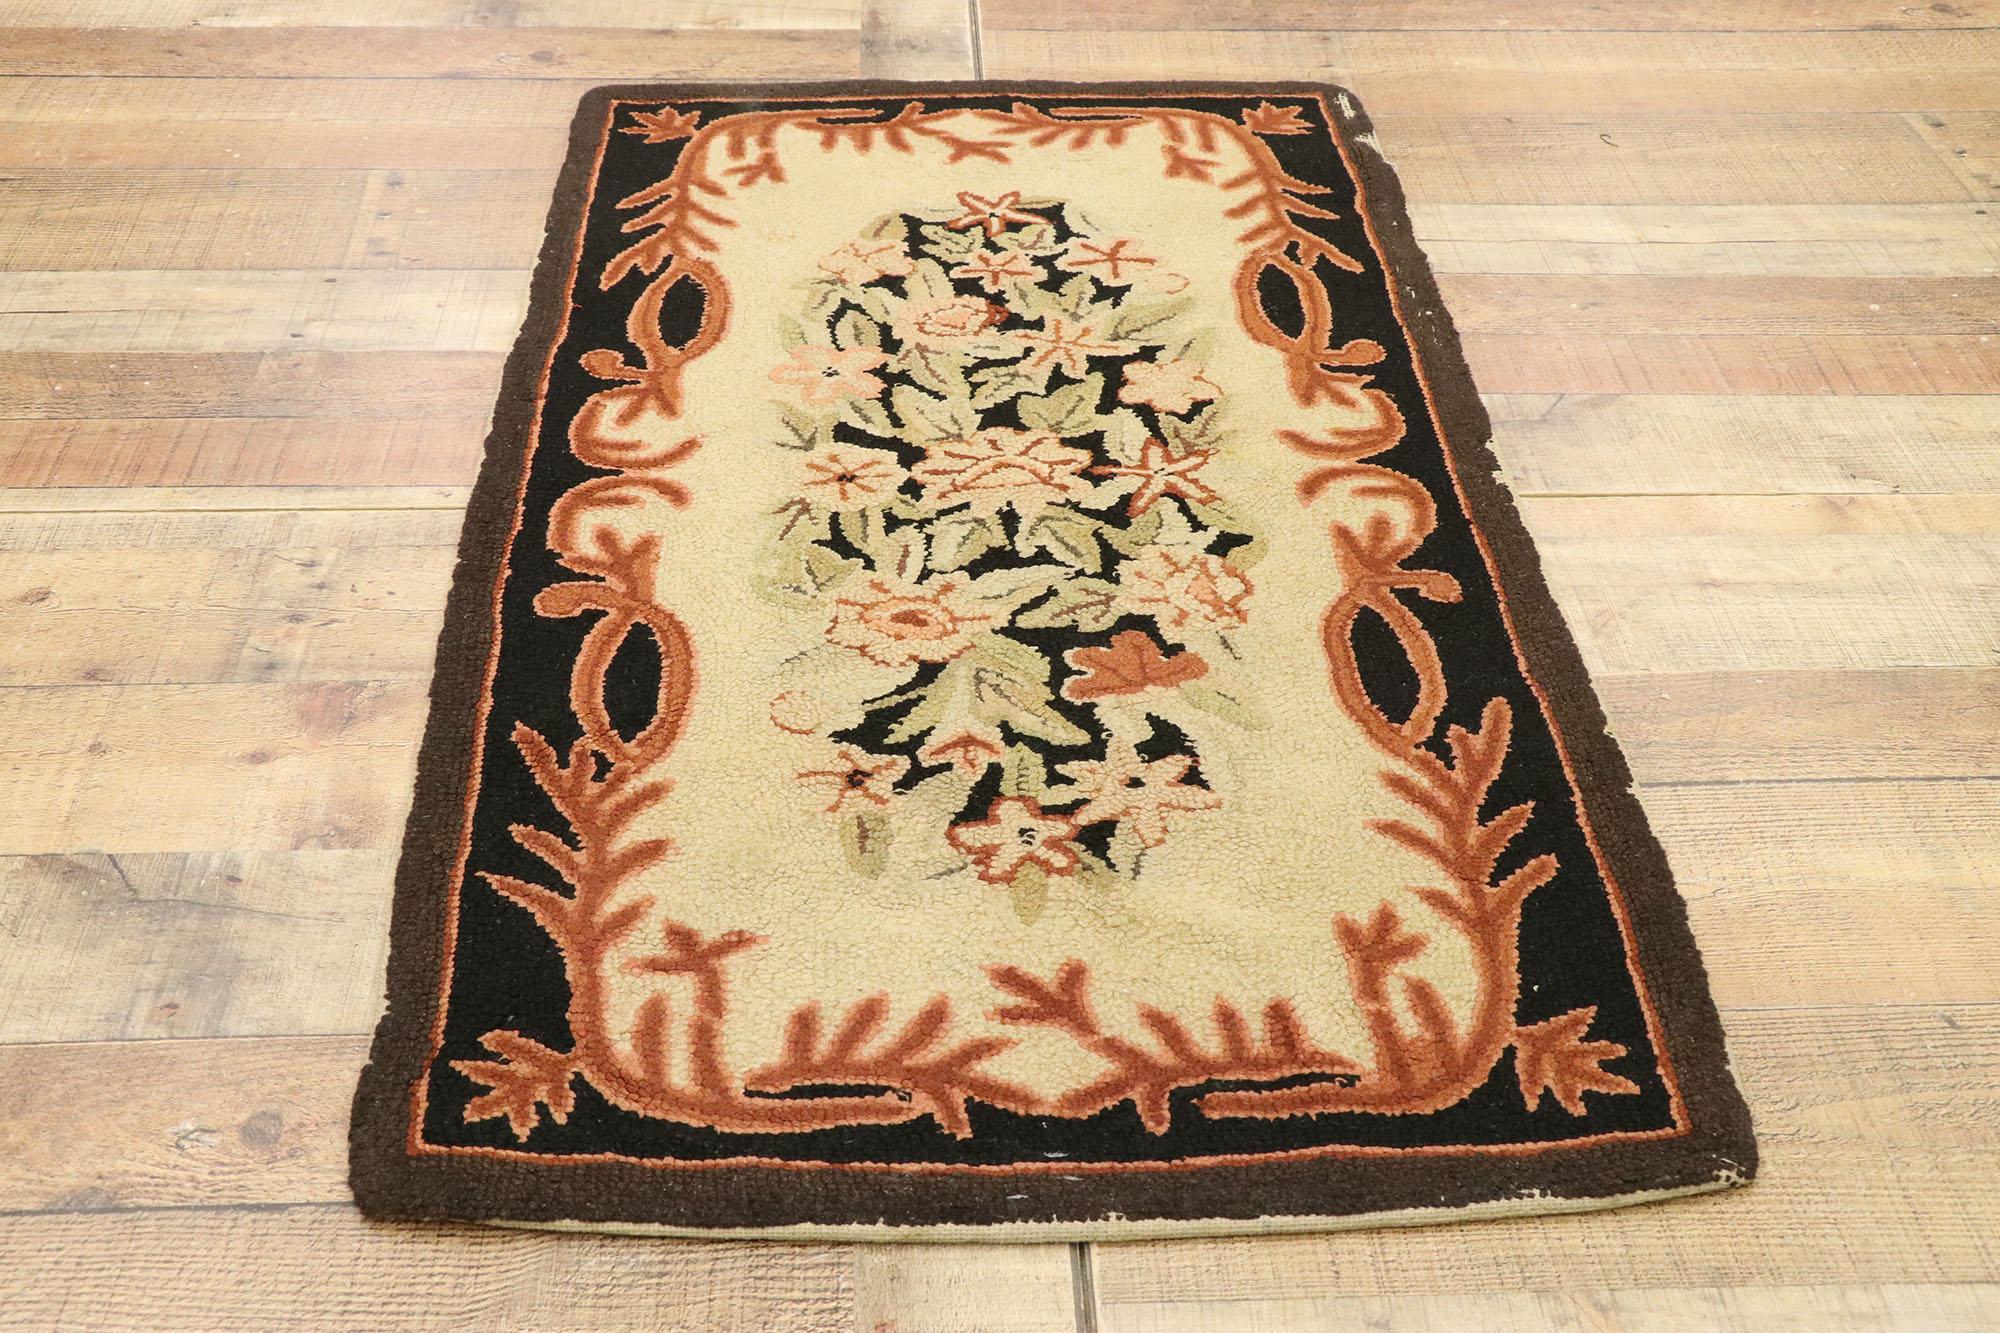 20th Century Antique American Floral Hooked Rug with French Provincial Style For Sale